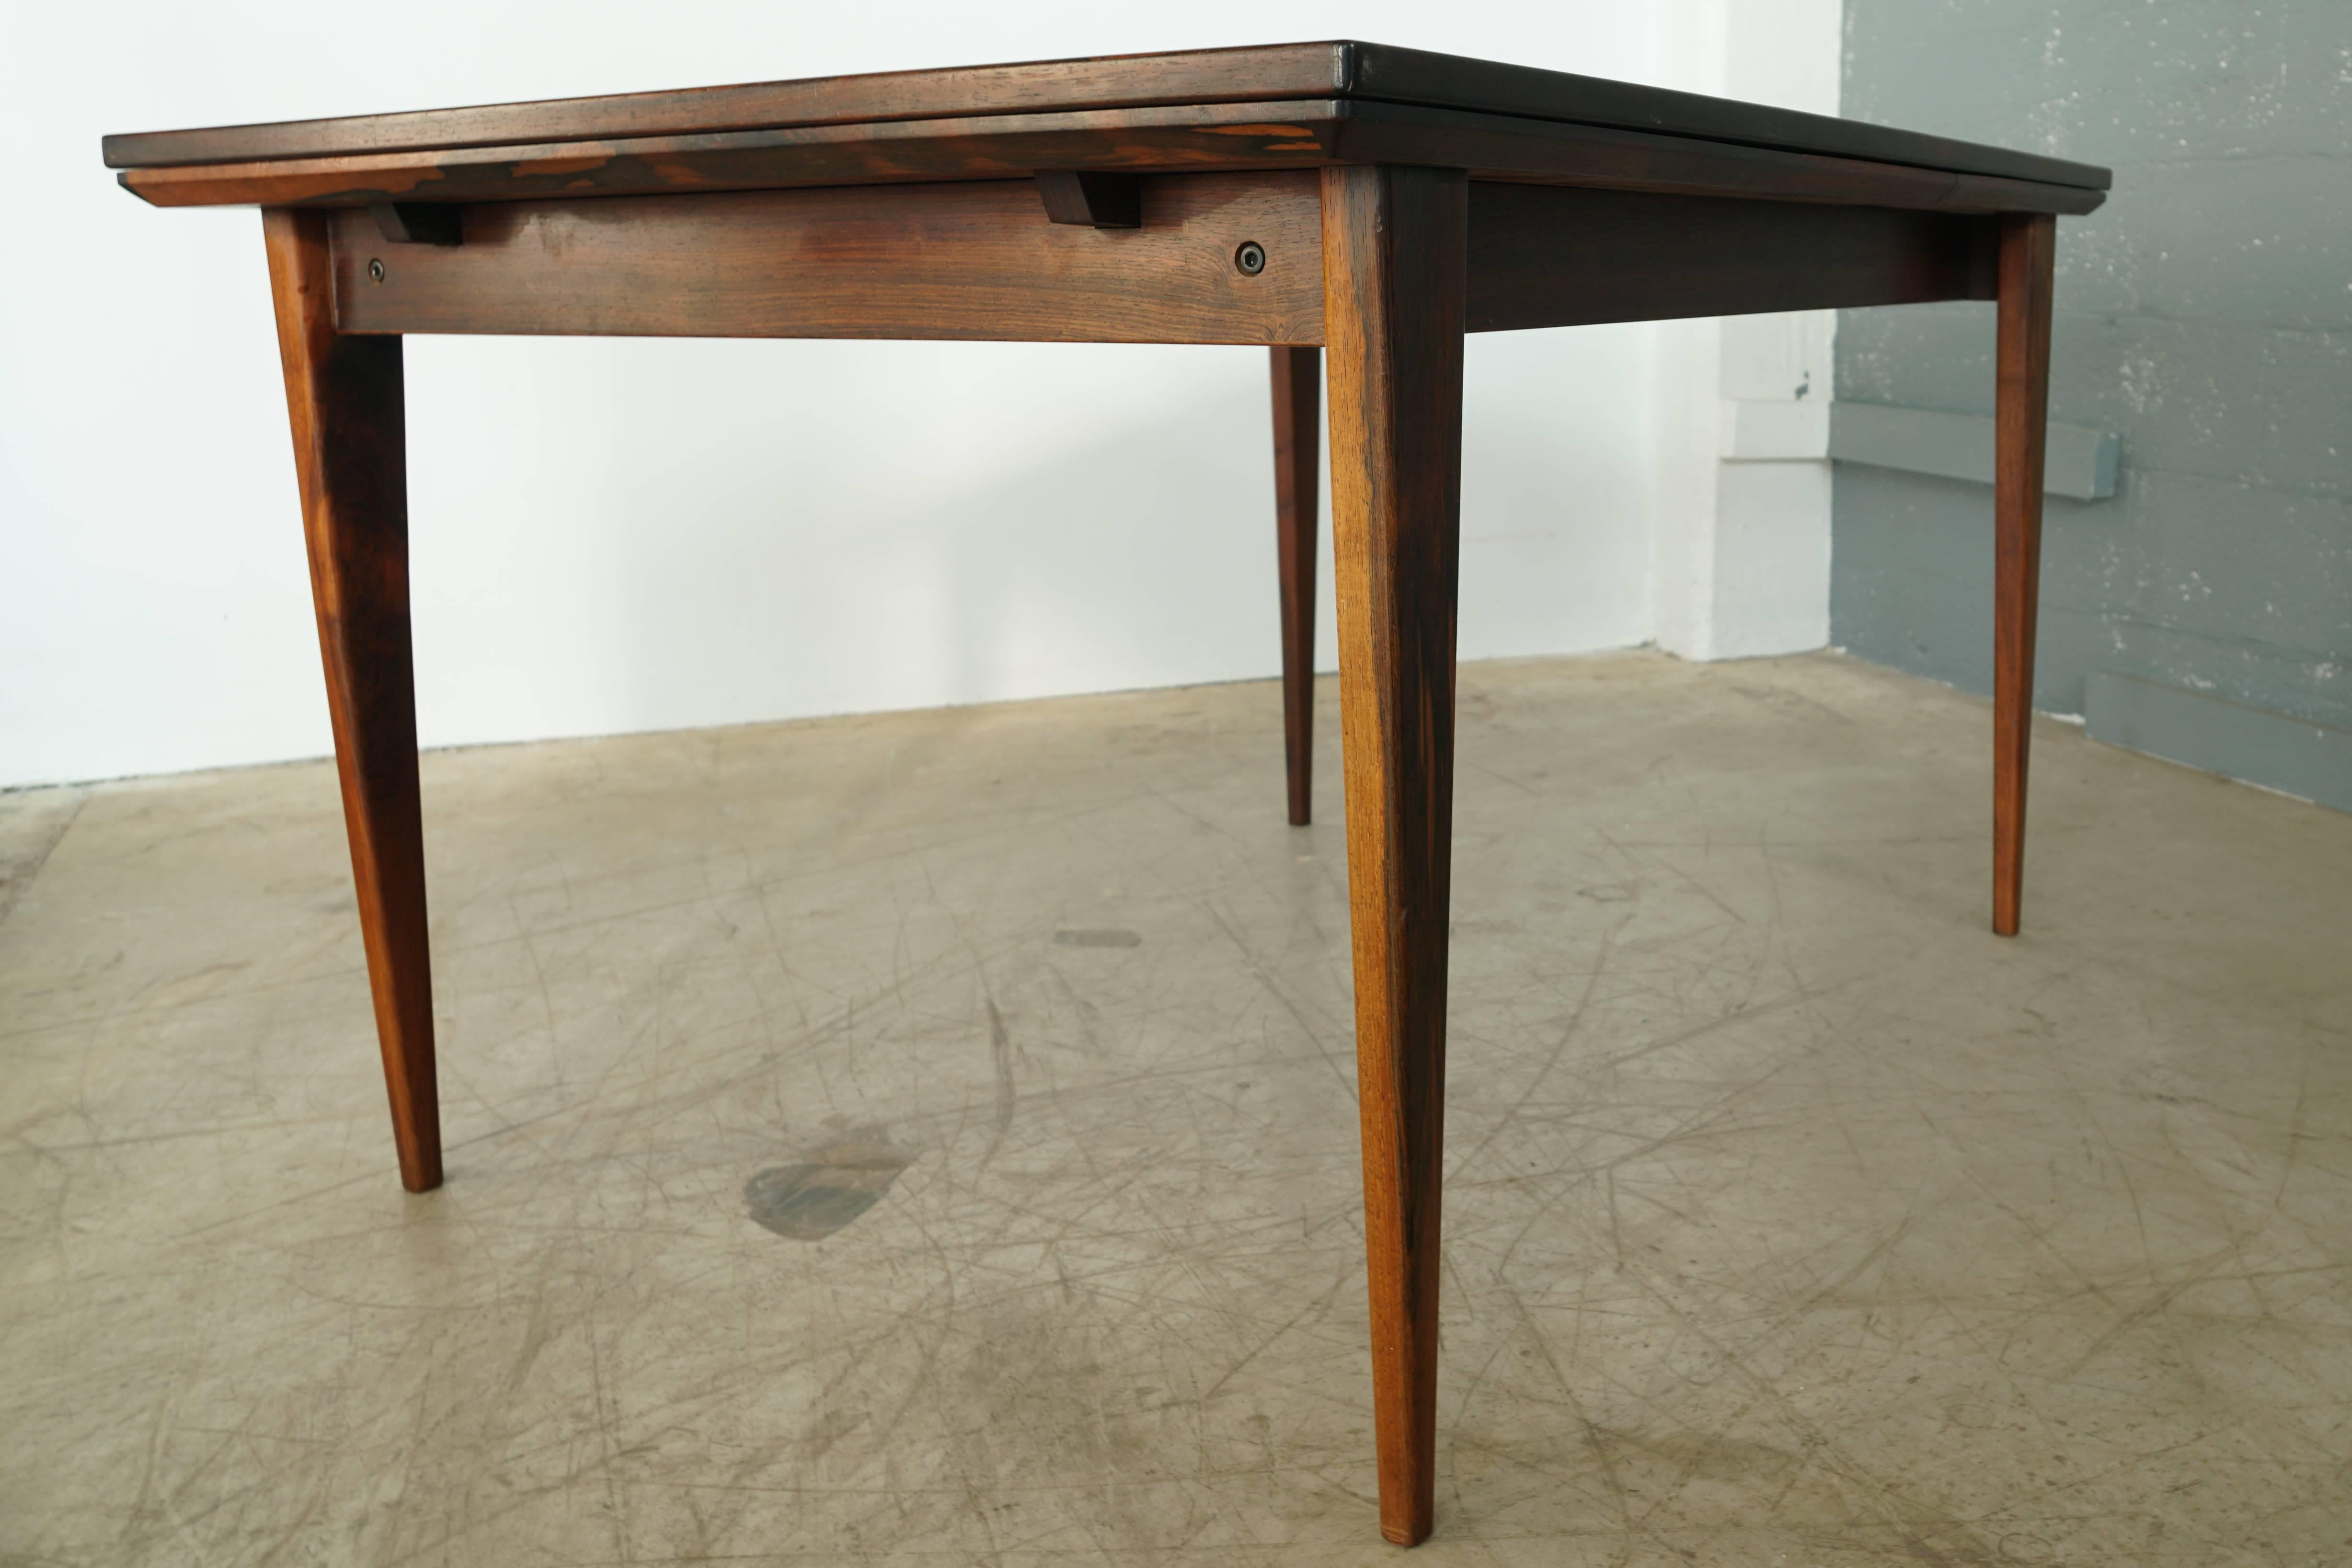 Mid-20th Century Danish Rosewood Extension Dining Table by Gudme Mobelfabrik